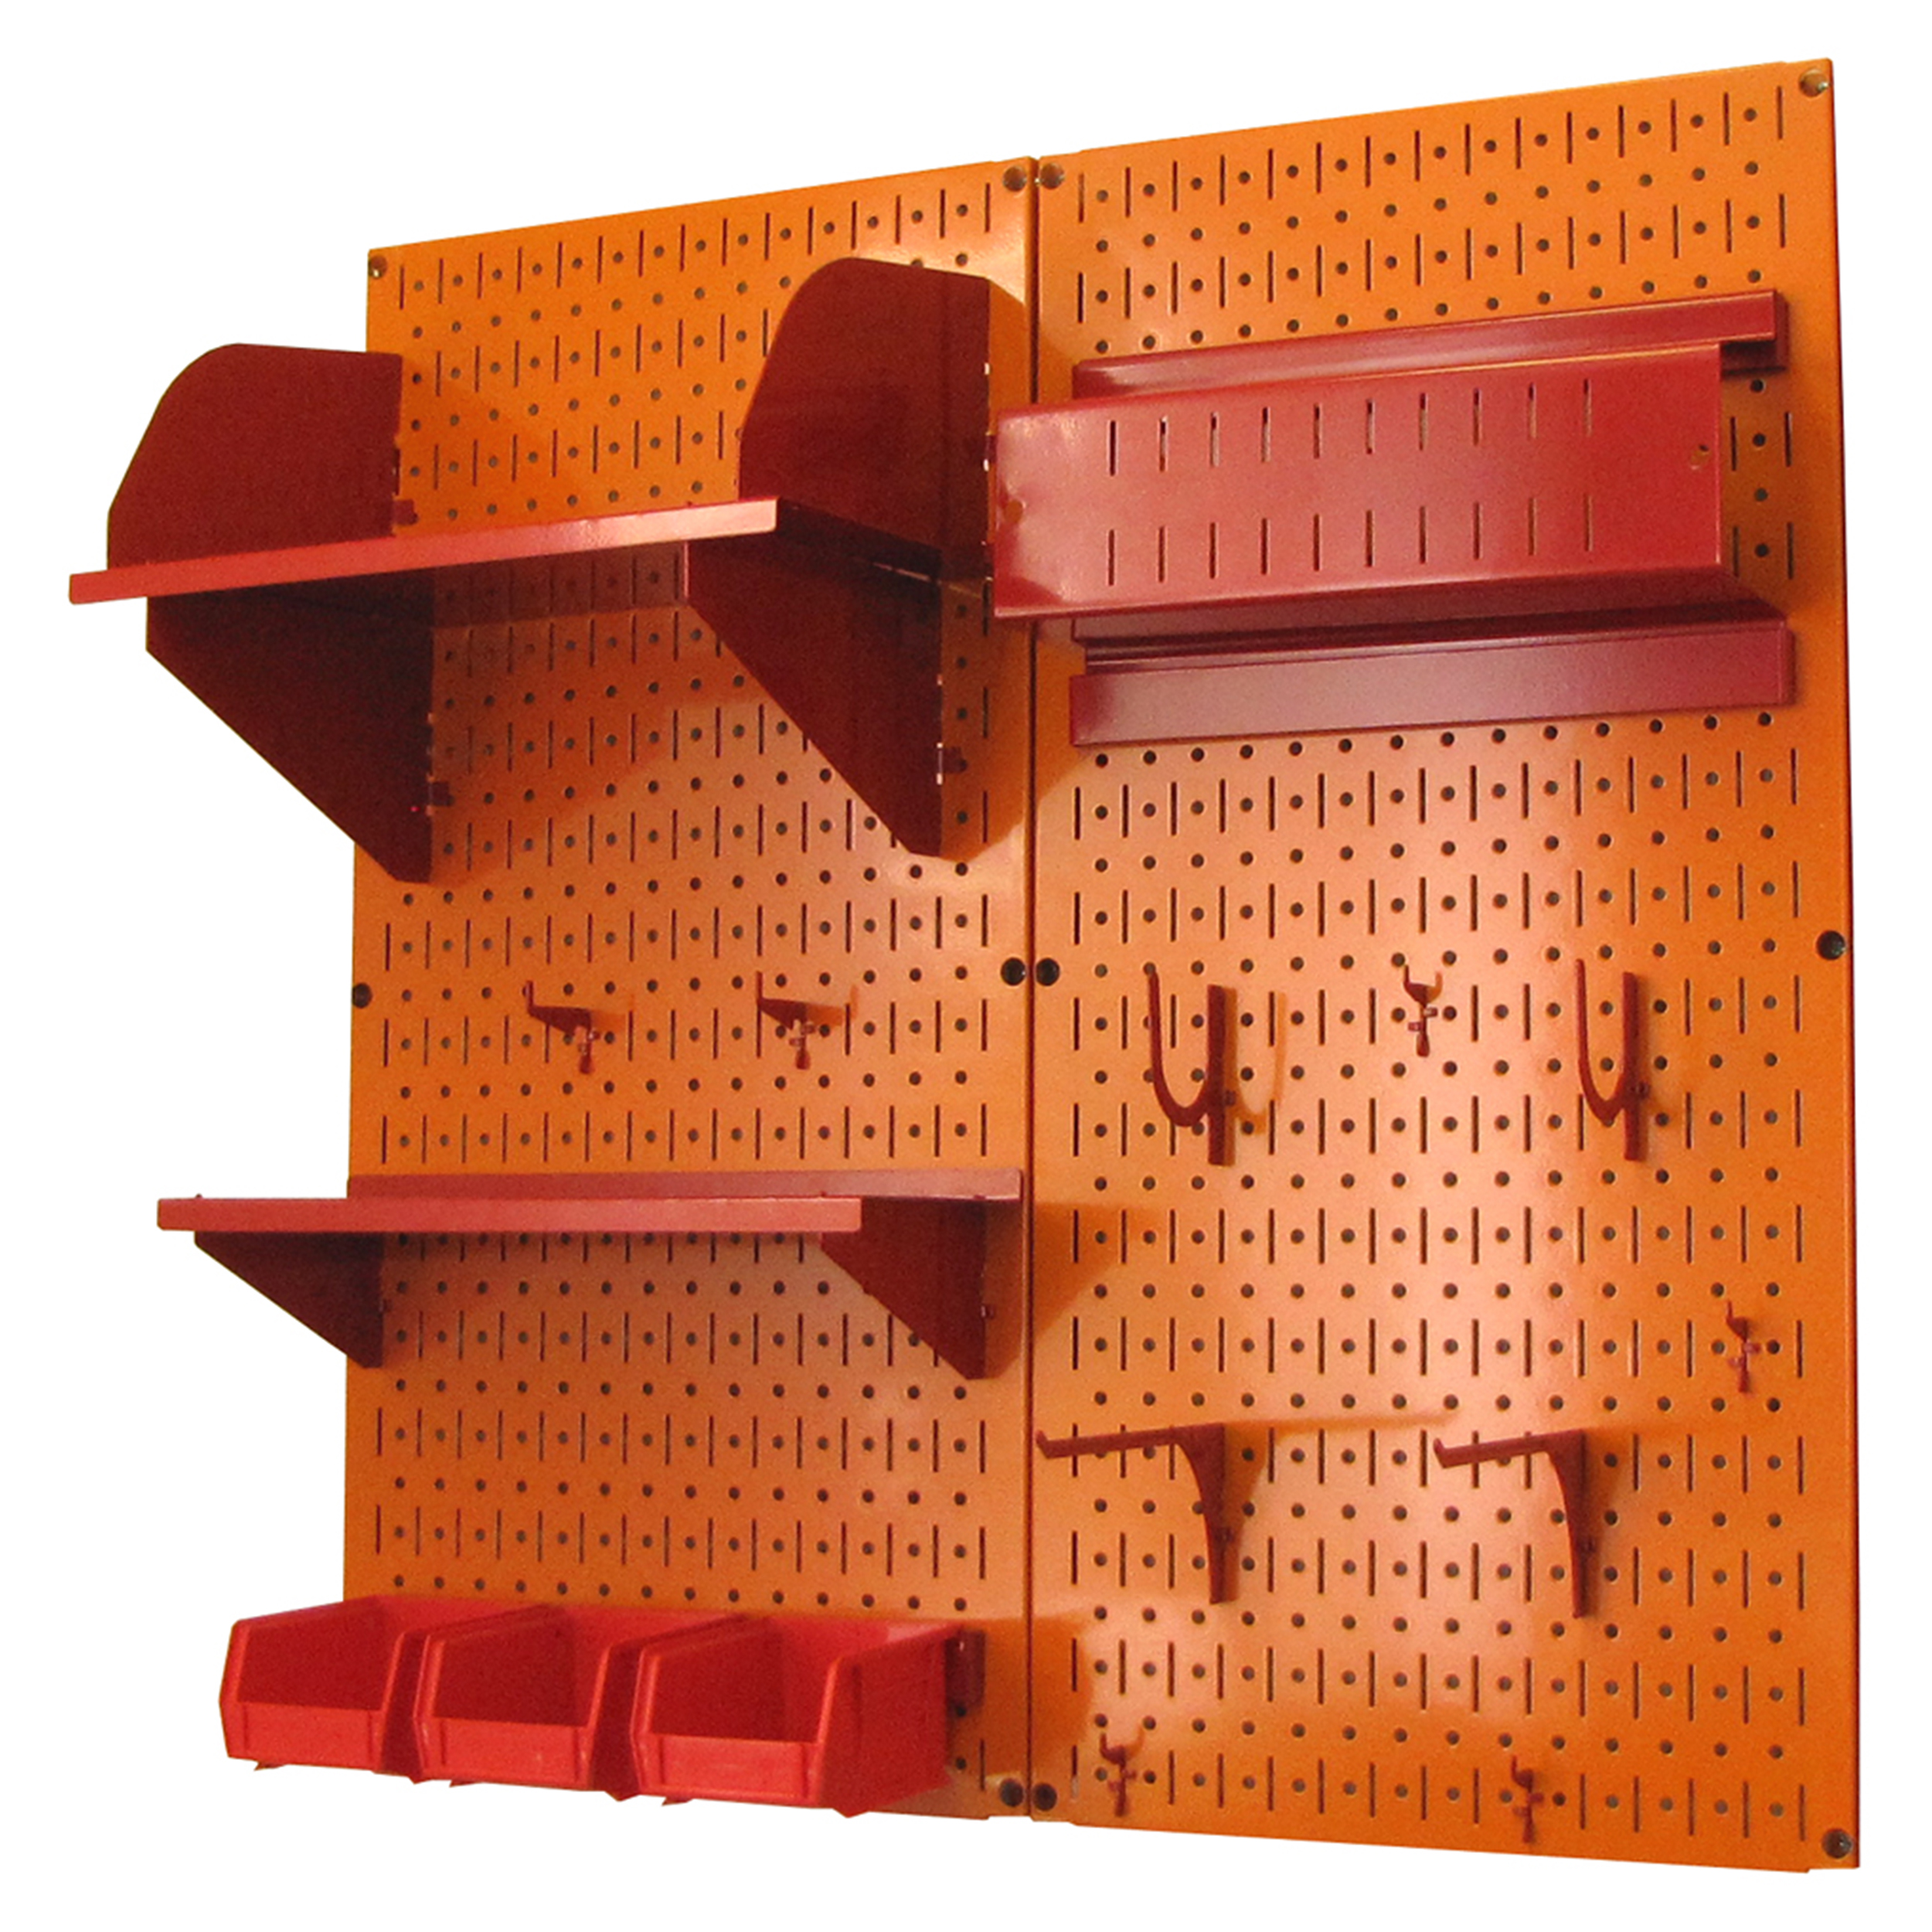 Pegboard Hobby Craft Pegboard Organizer Storage Kit With Orange Pegboard And Red Accessories